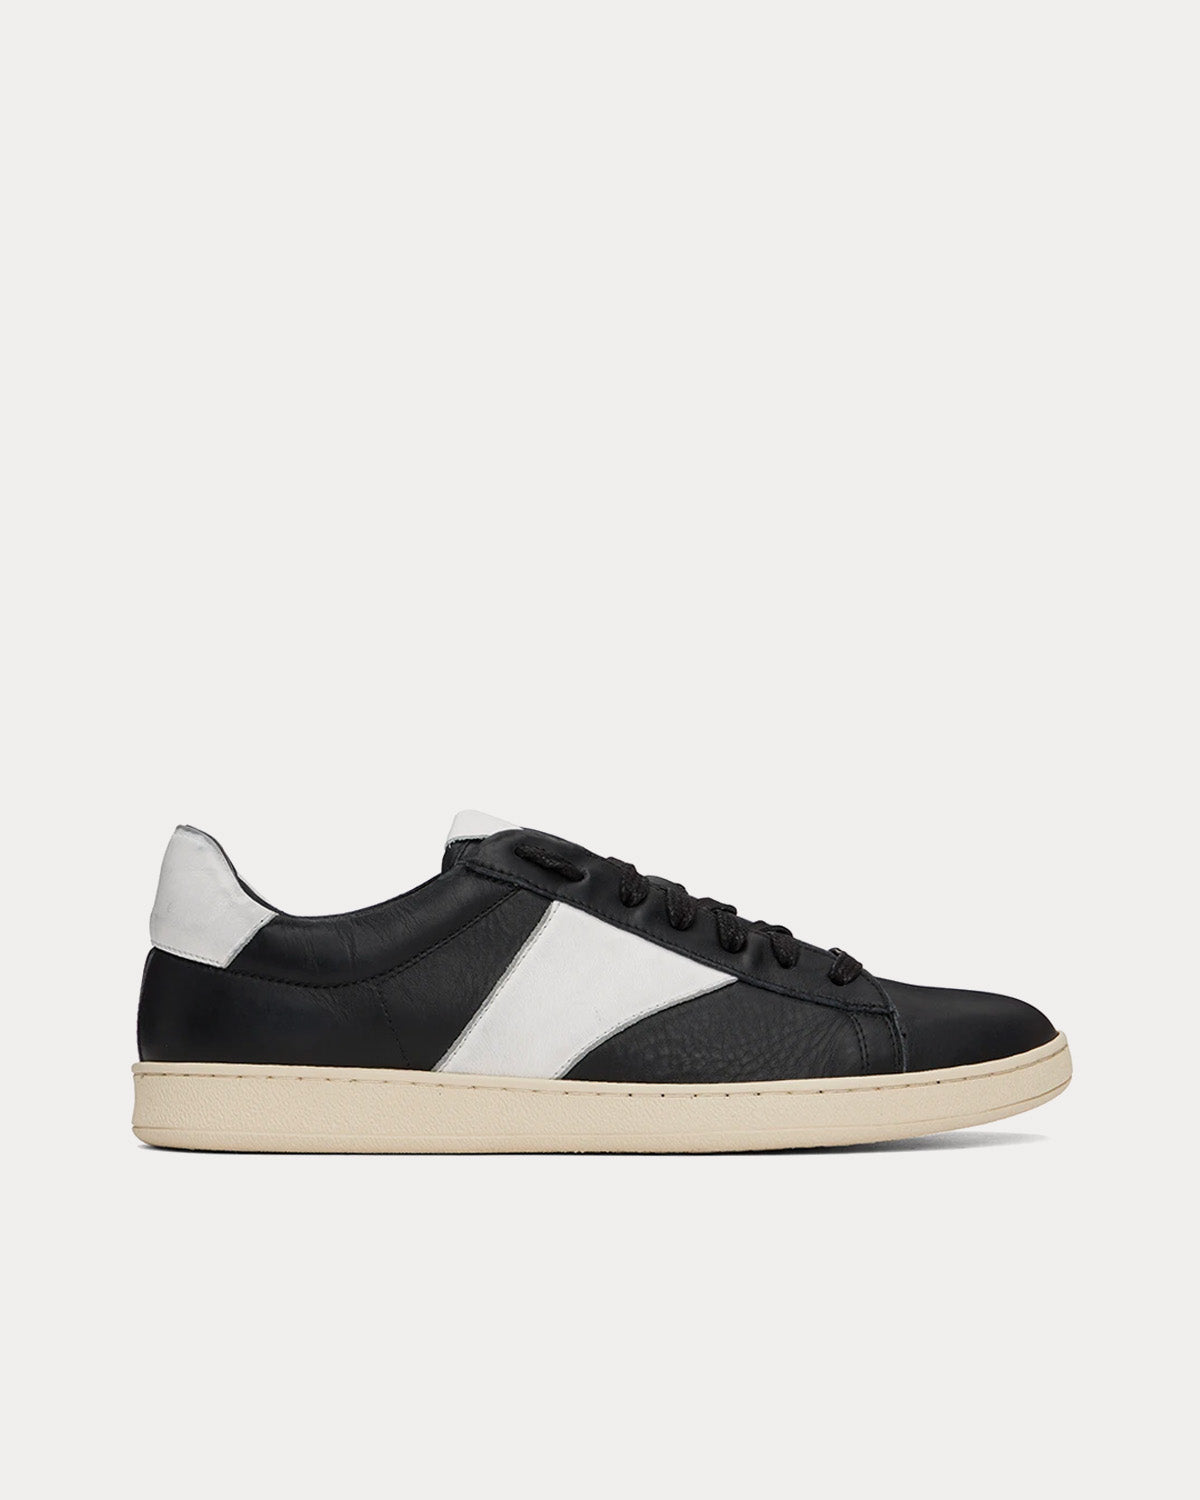 Rhude - Court Black / White Low Top Sneakers